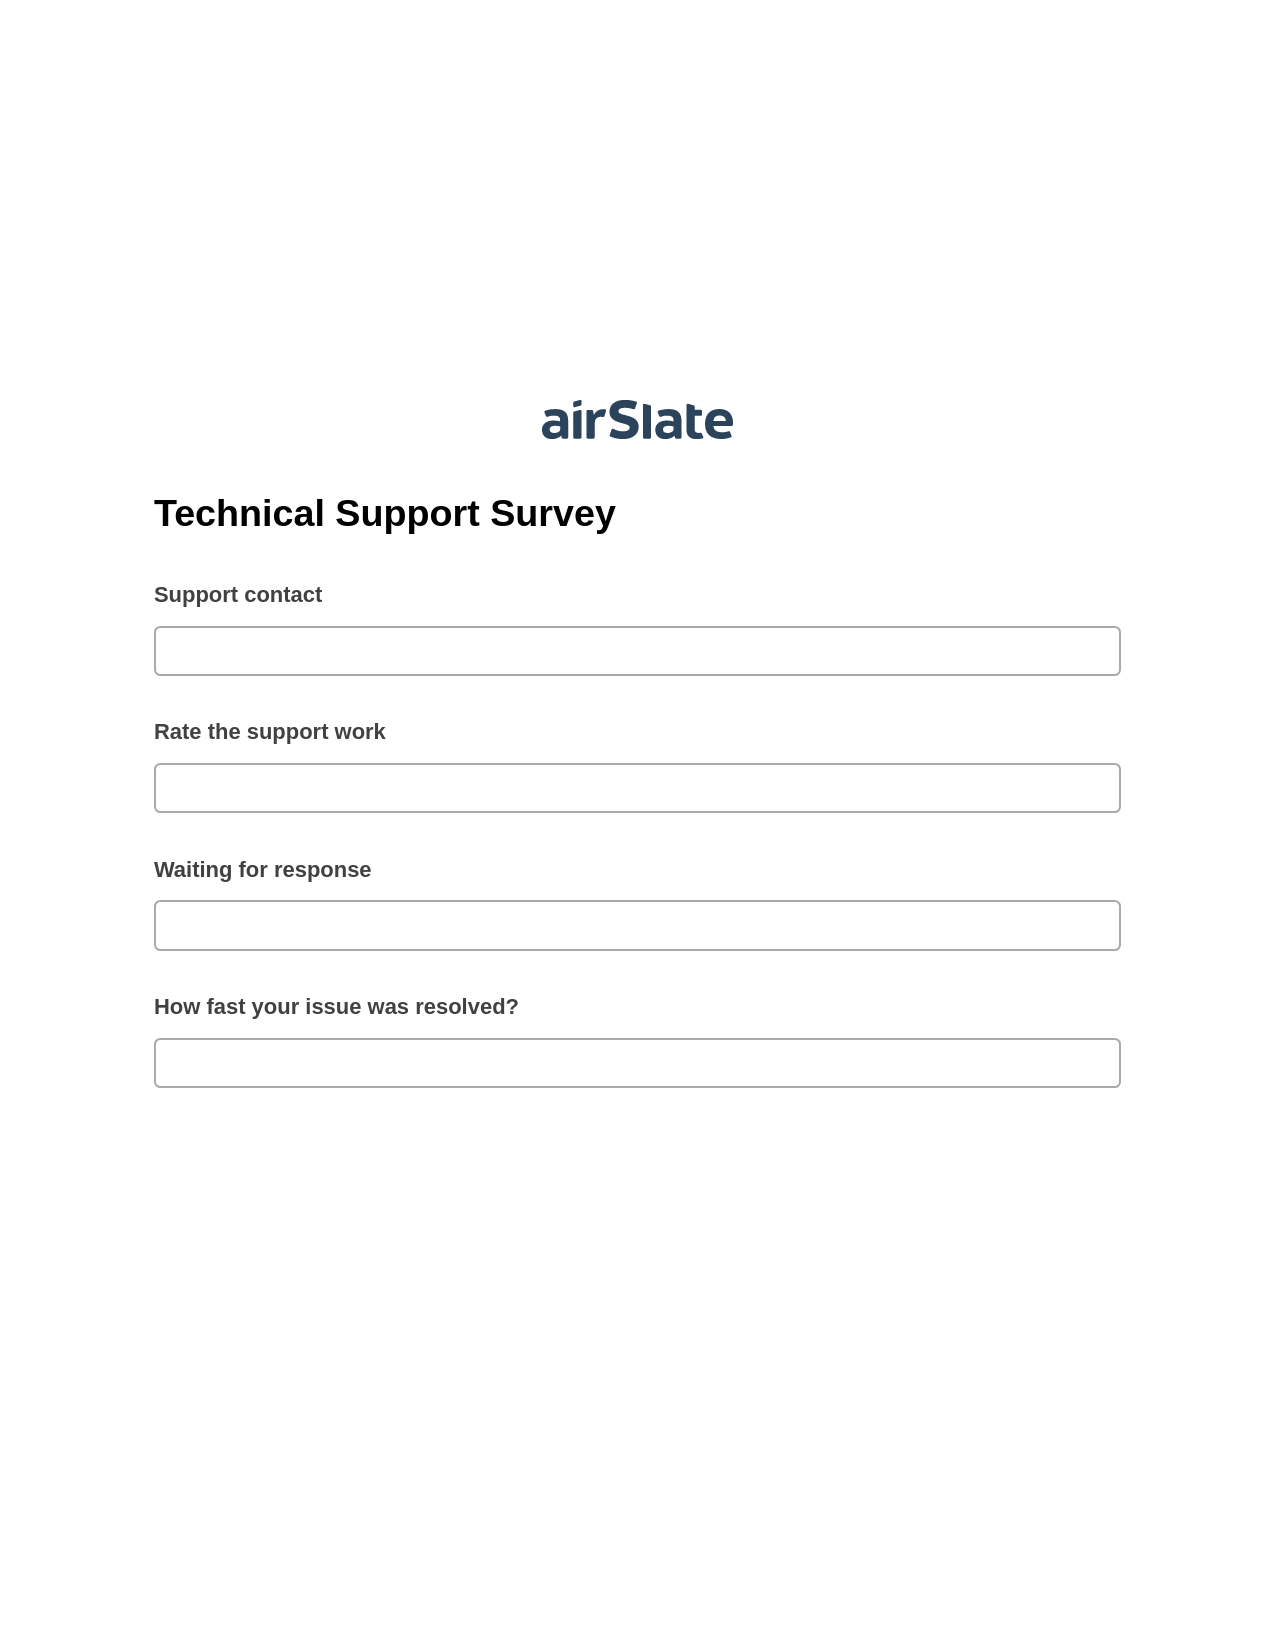 Multirole Technical Support Survey Pre-fill from MS Dynamics 365 Records, Create Slate Reminder Bot, Export to WebMerge Bot